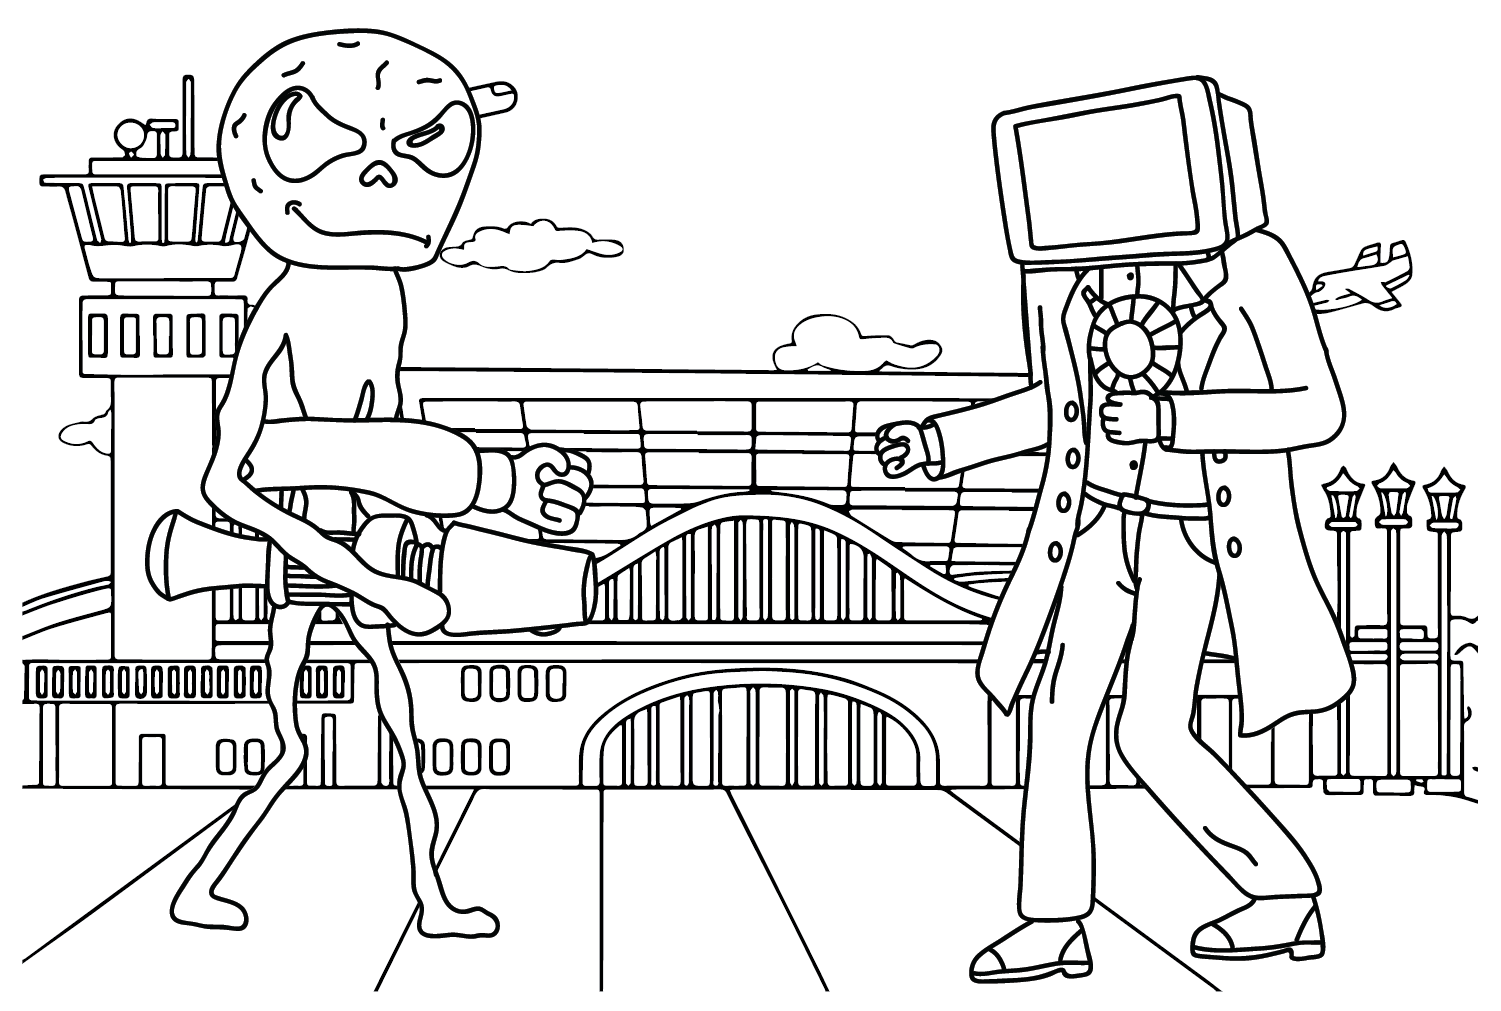 TV Man Coloring Pages to Download from TV Man